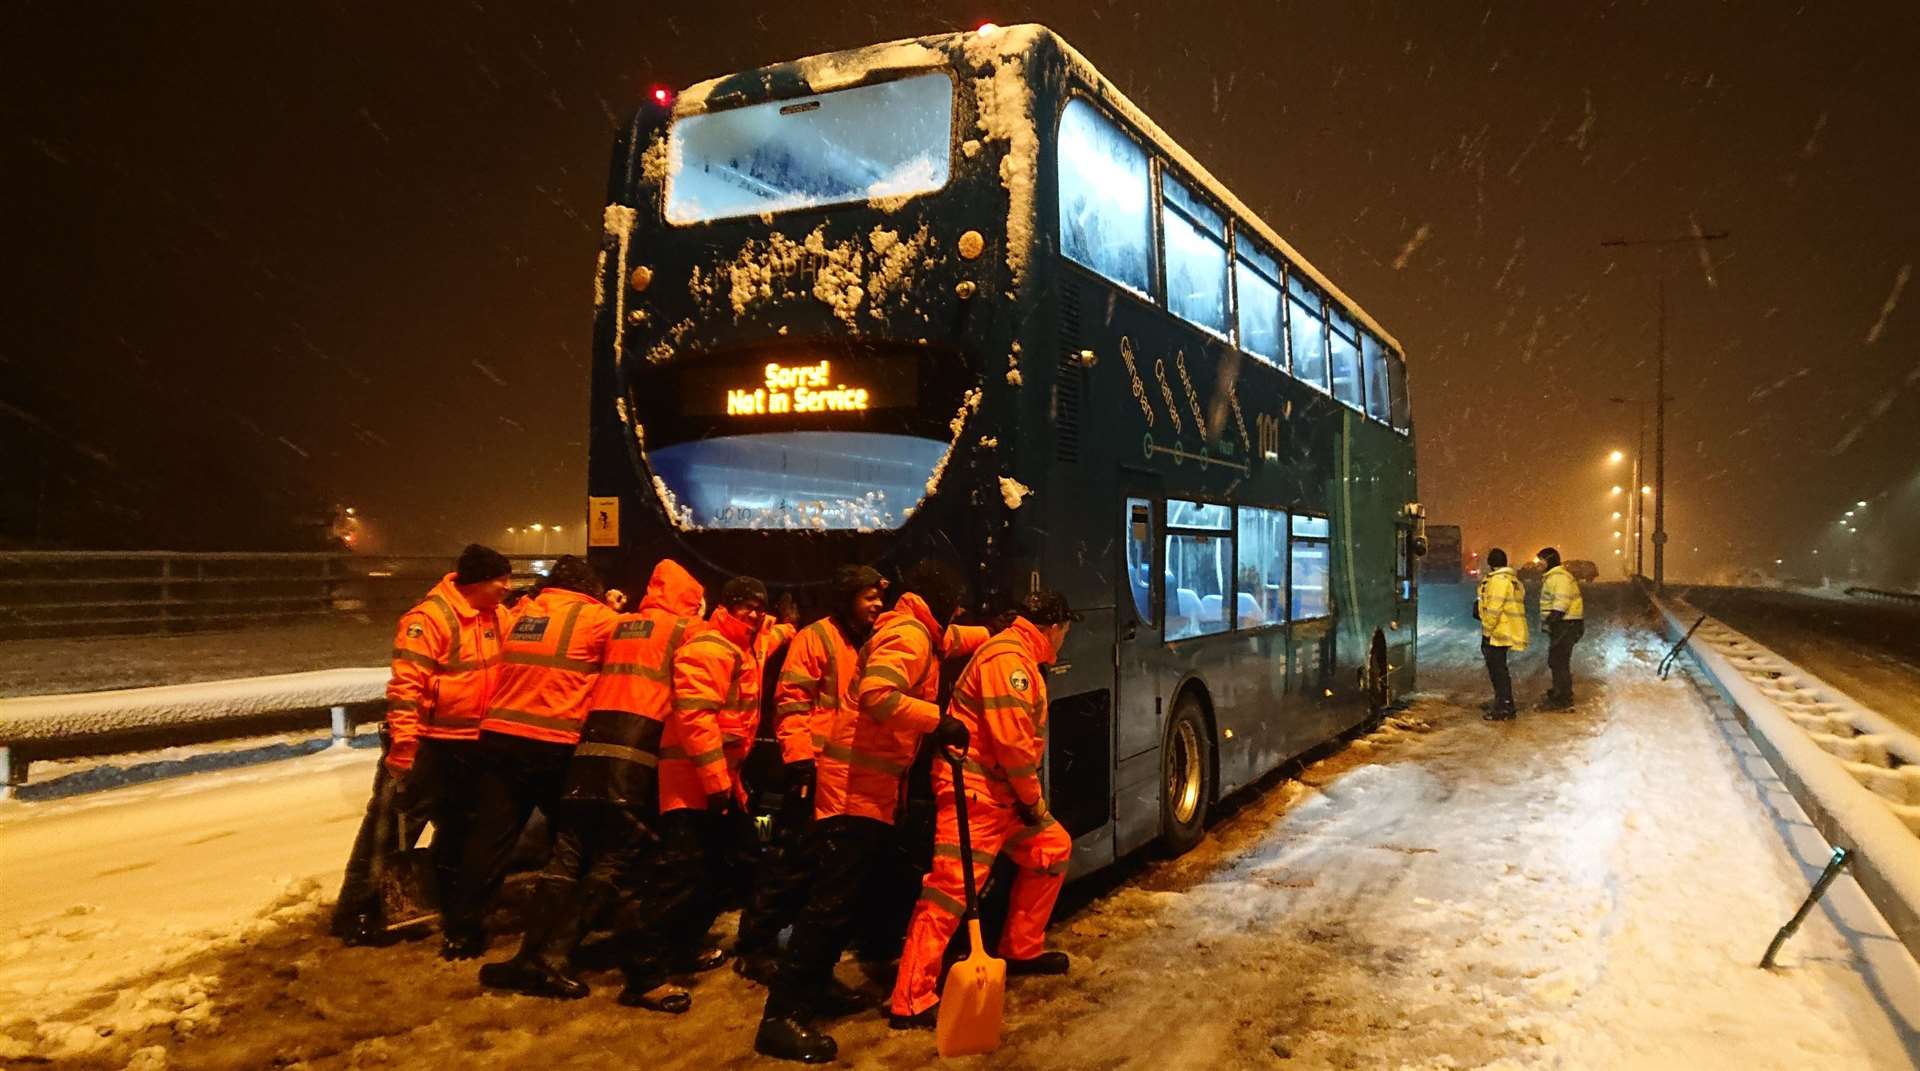 South East 4x4 Response members push a bus in the snow on Blue Bell Hill, in February 2018